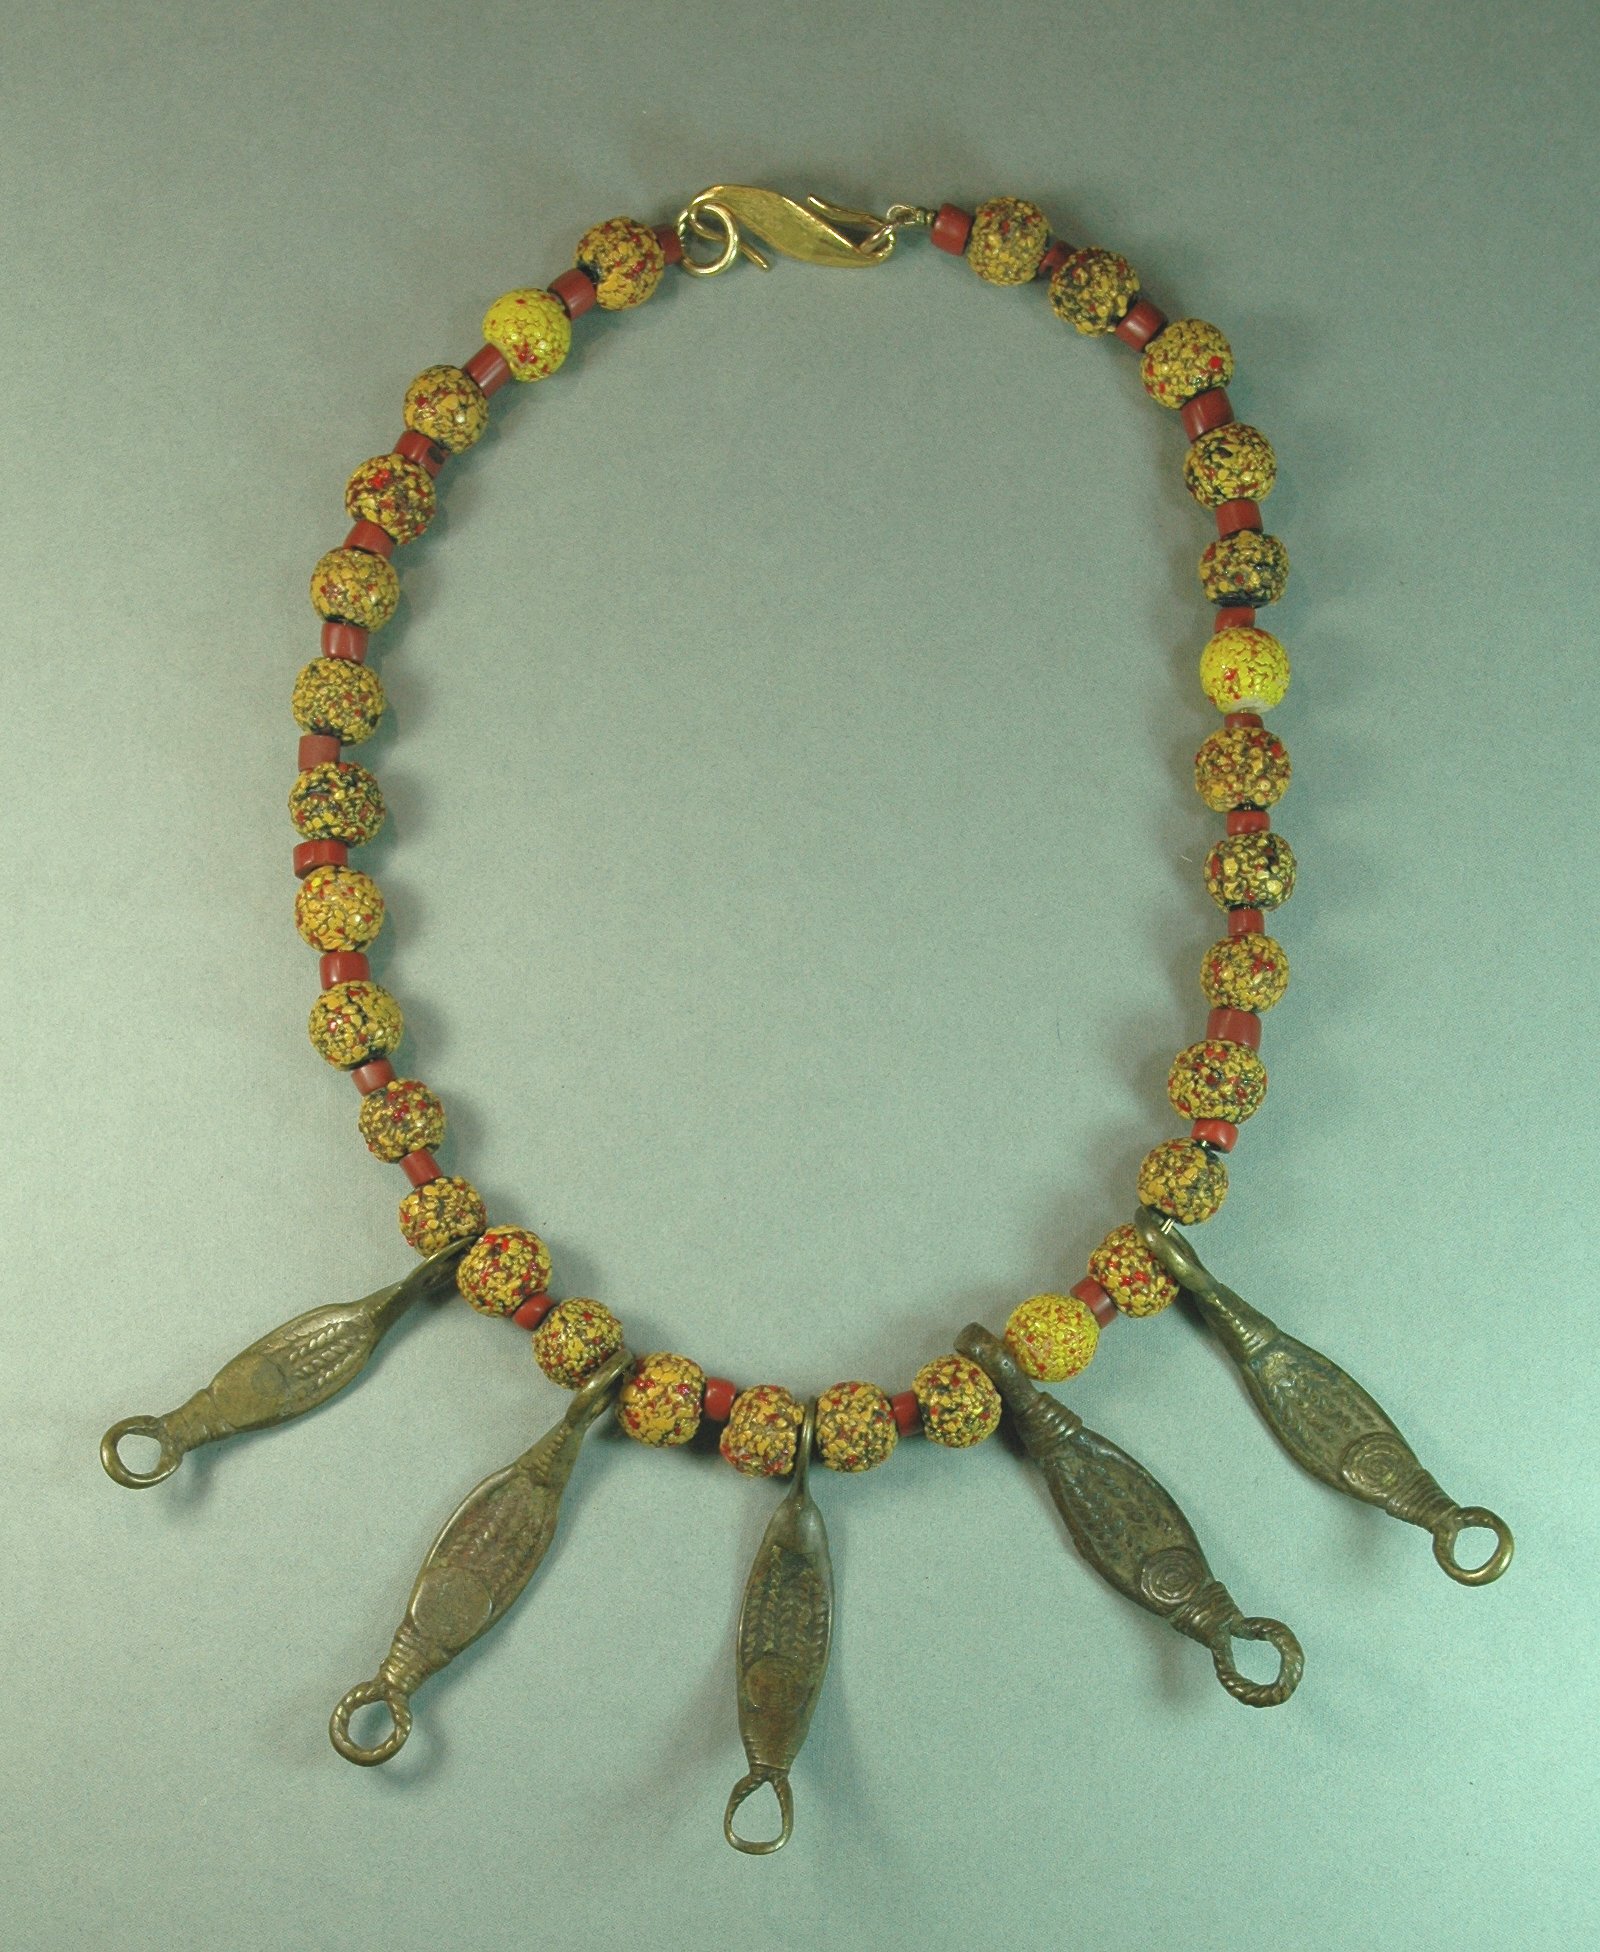 Beads from Venice and bronze pendants